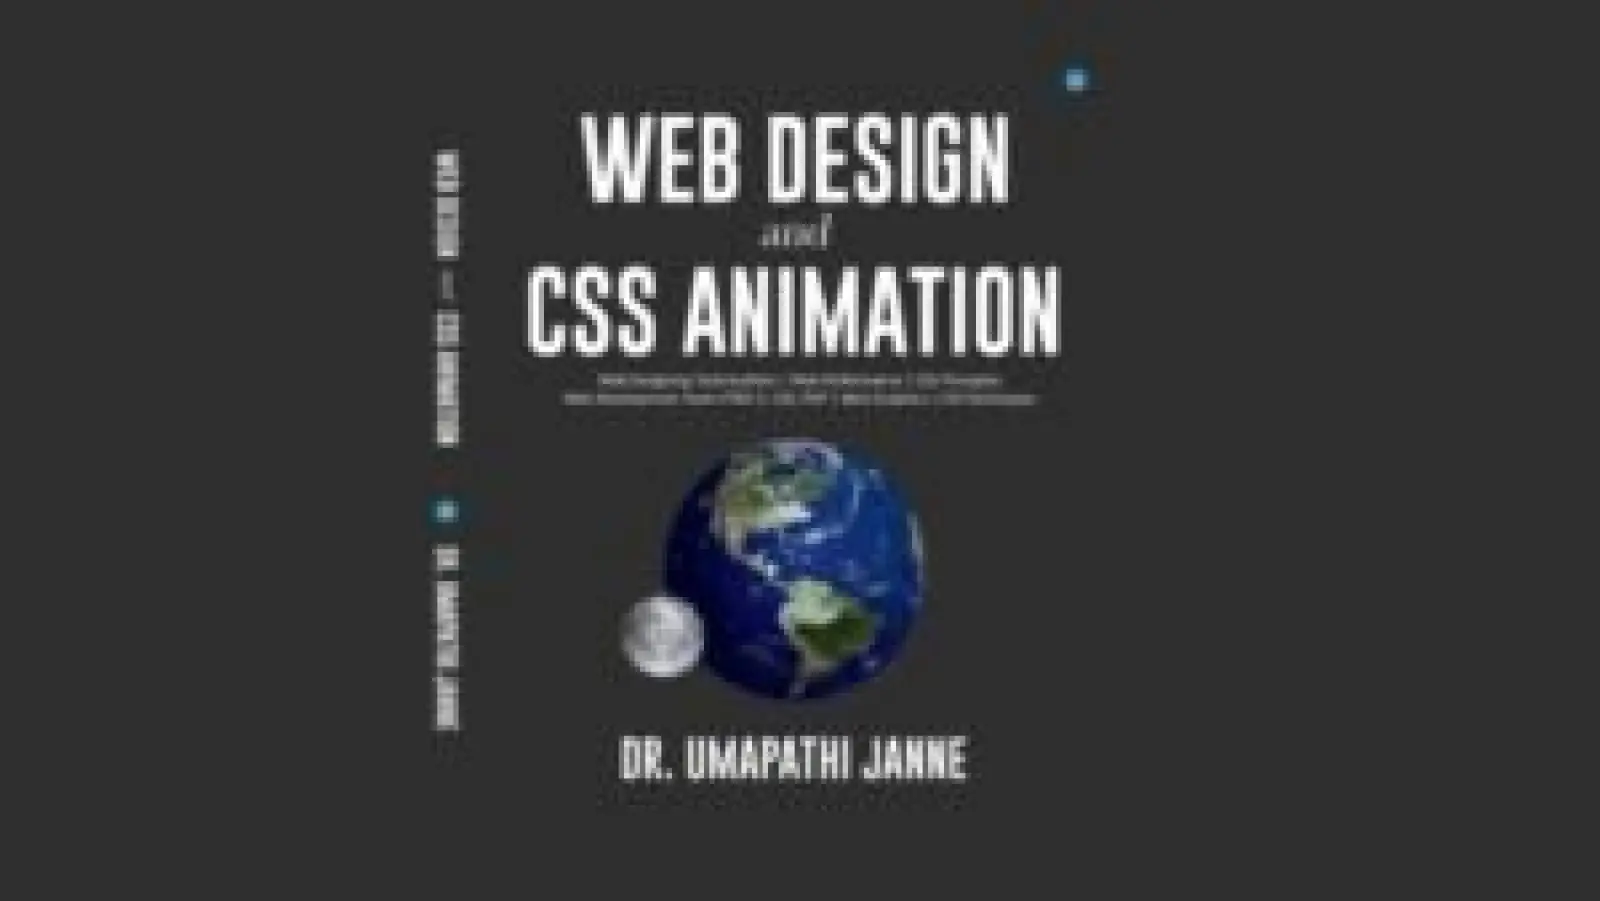 ‘Web Design and CSS Animation’ by Dr. Umapathi Janne: A Deep Dive into Modern Web Techniques